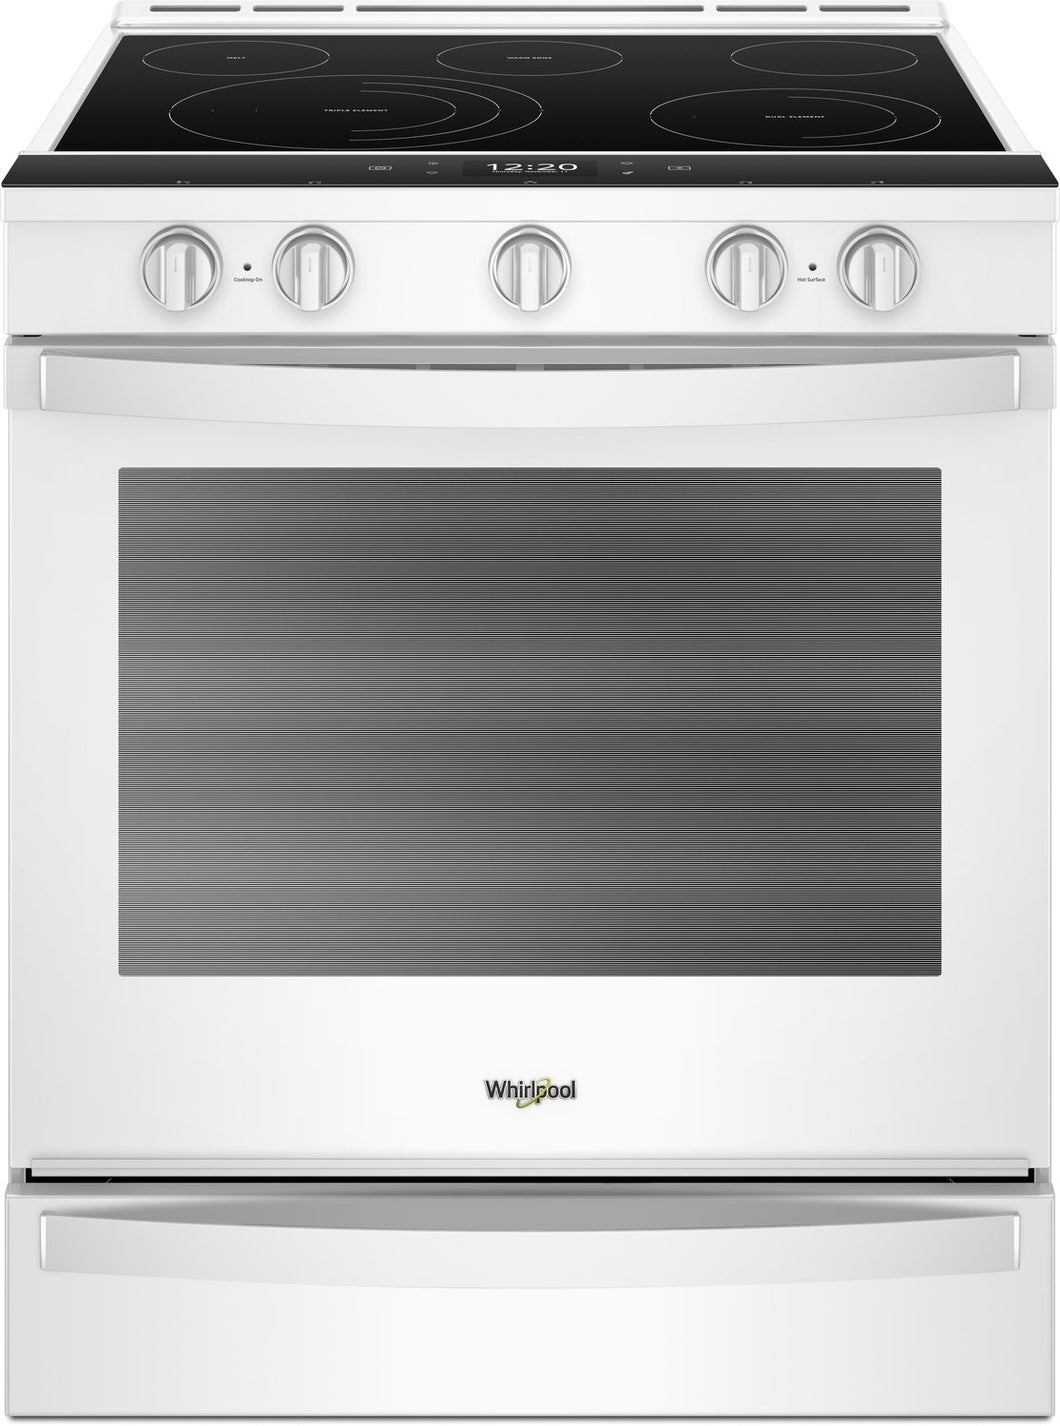 Whirlpool - 30 Inch Front Control Slide In Range With True Convection - YWEE750